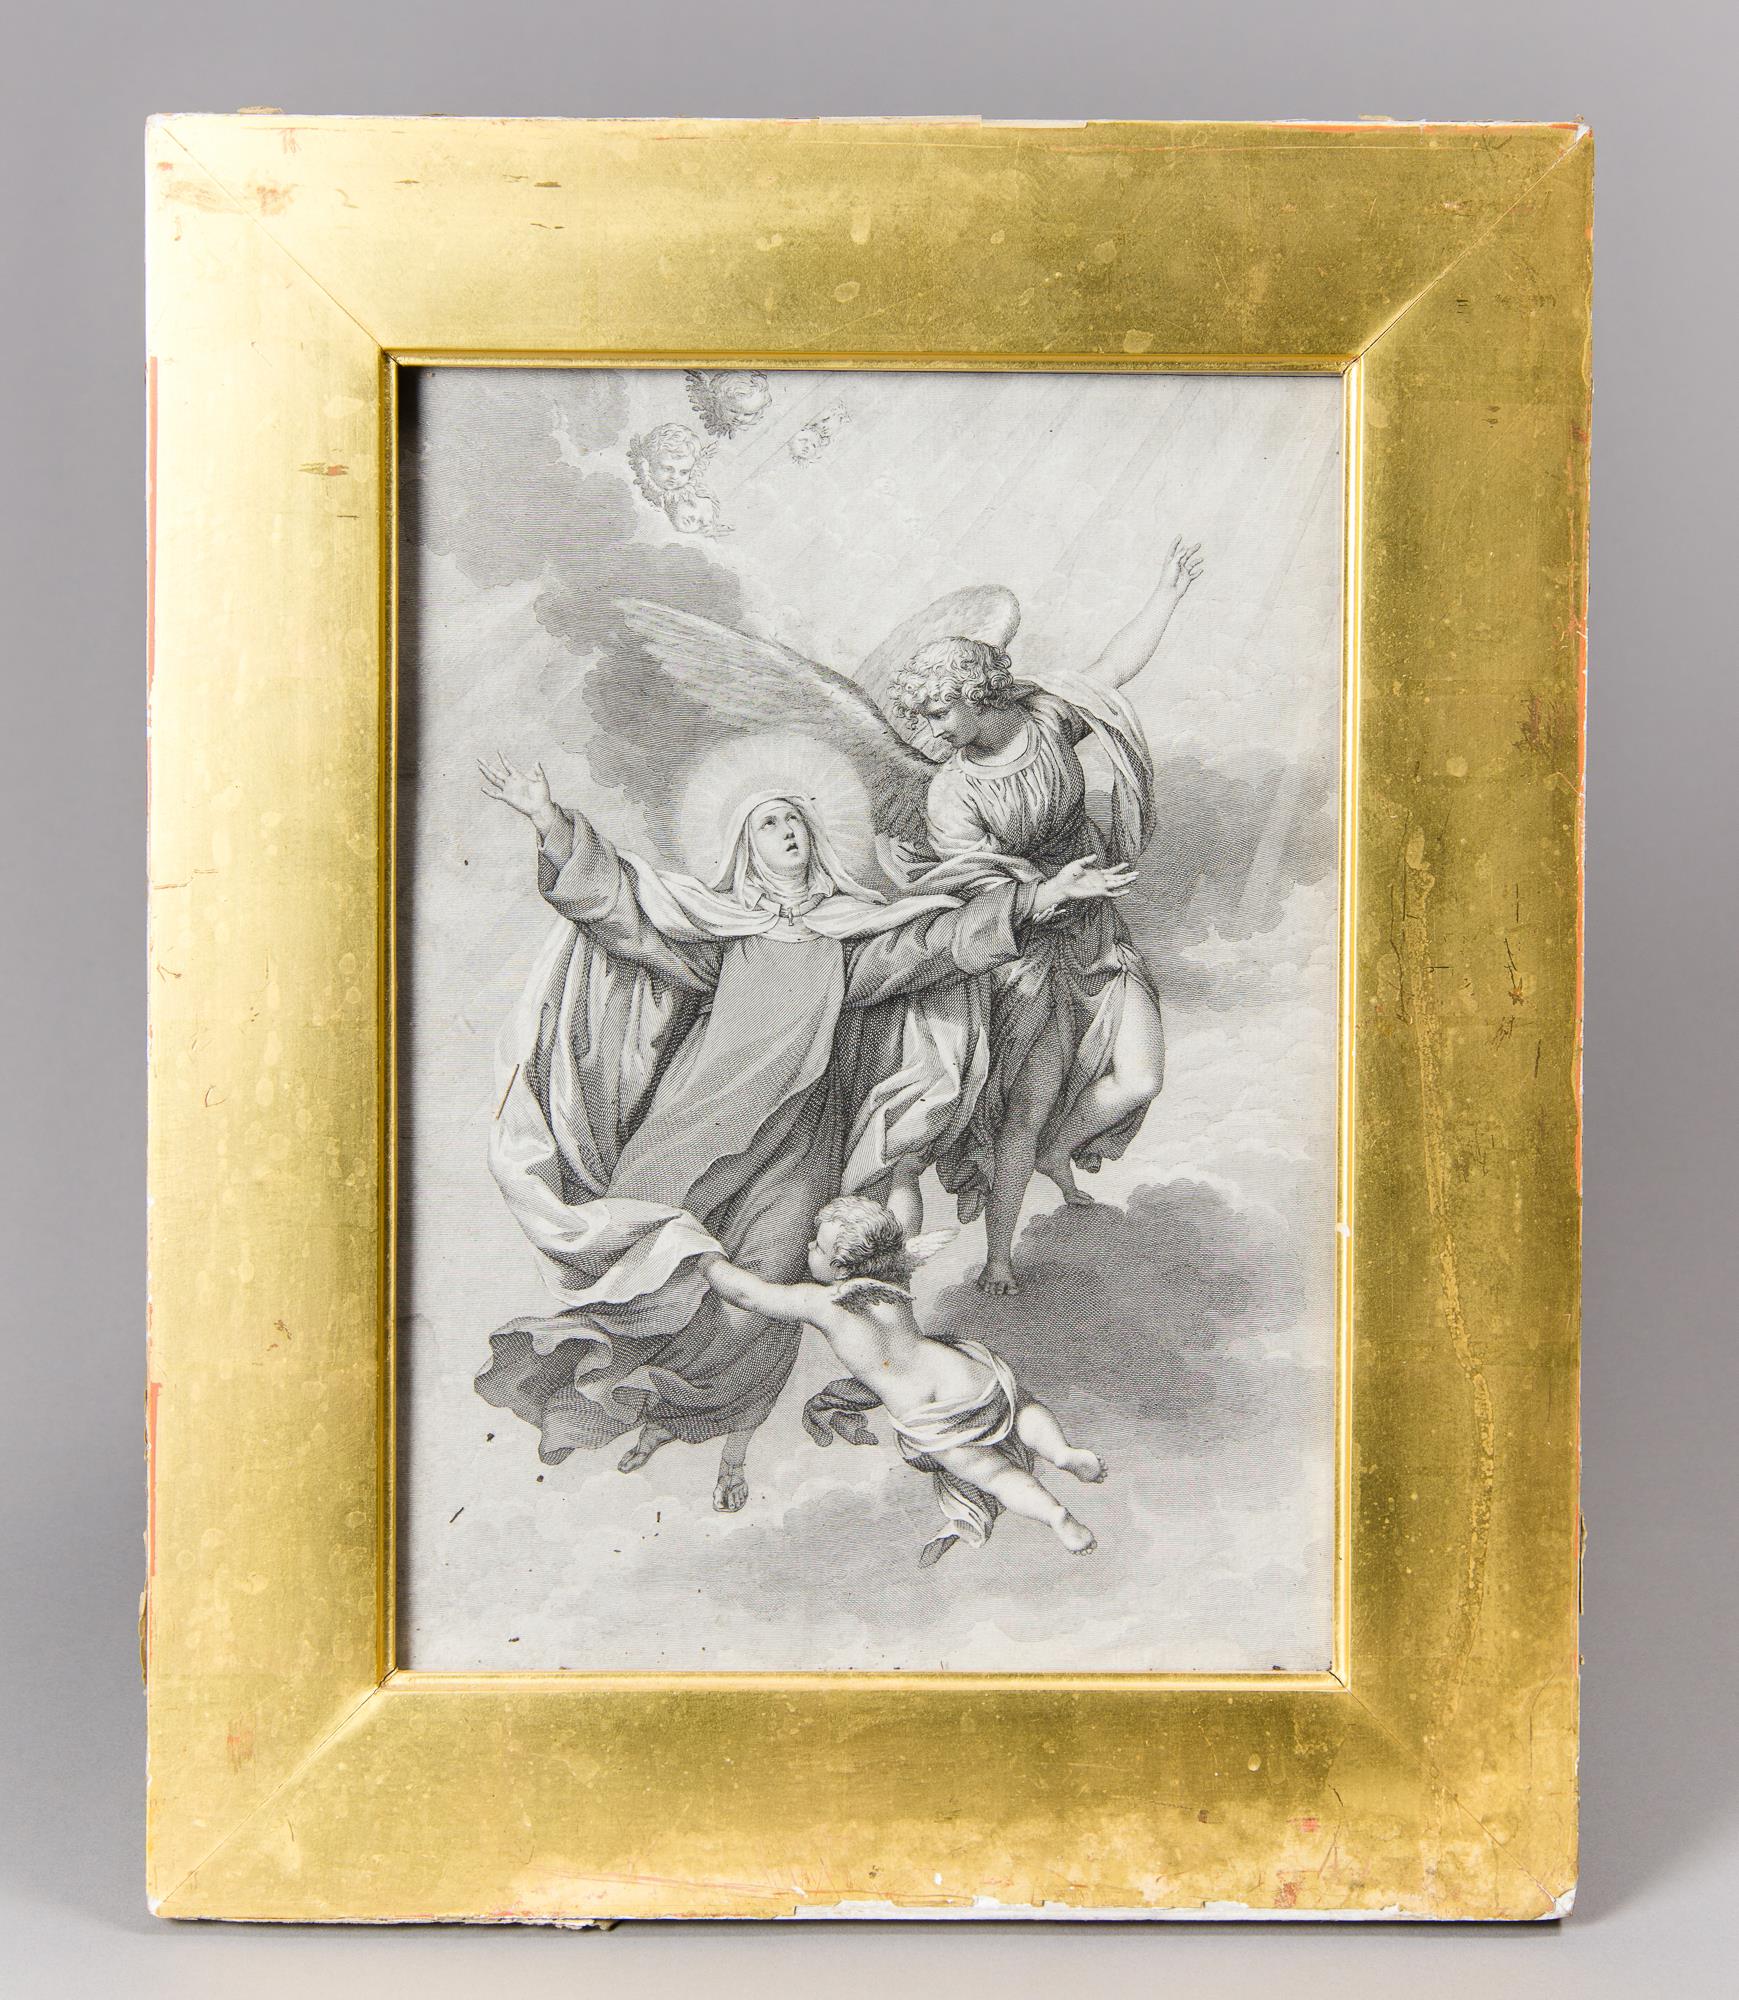 A 19TH CENTURY RELIGIOUS ENGRAVING WITH ANGELS AND CHERUBIM. Framed and glazed. (h 42cm x w 33.5cm)